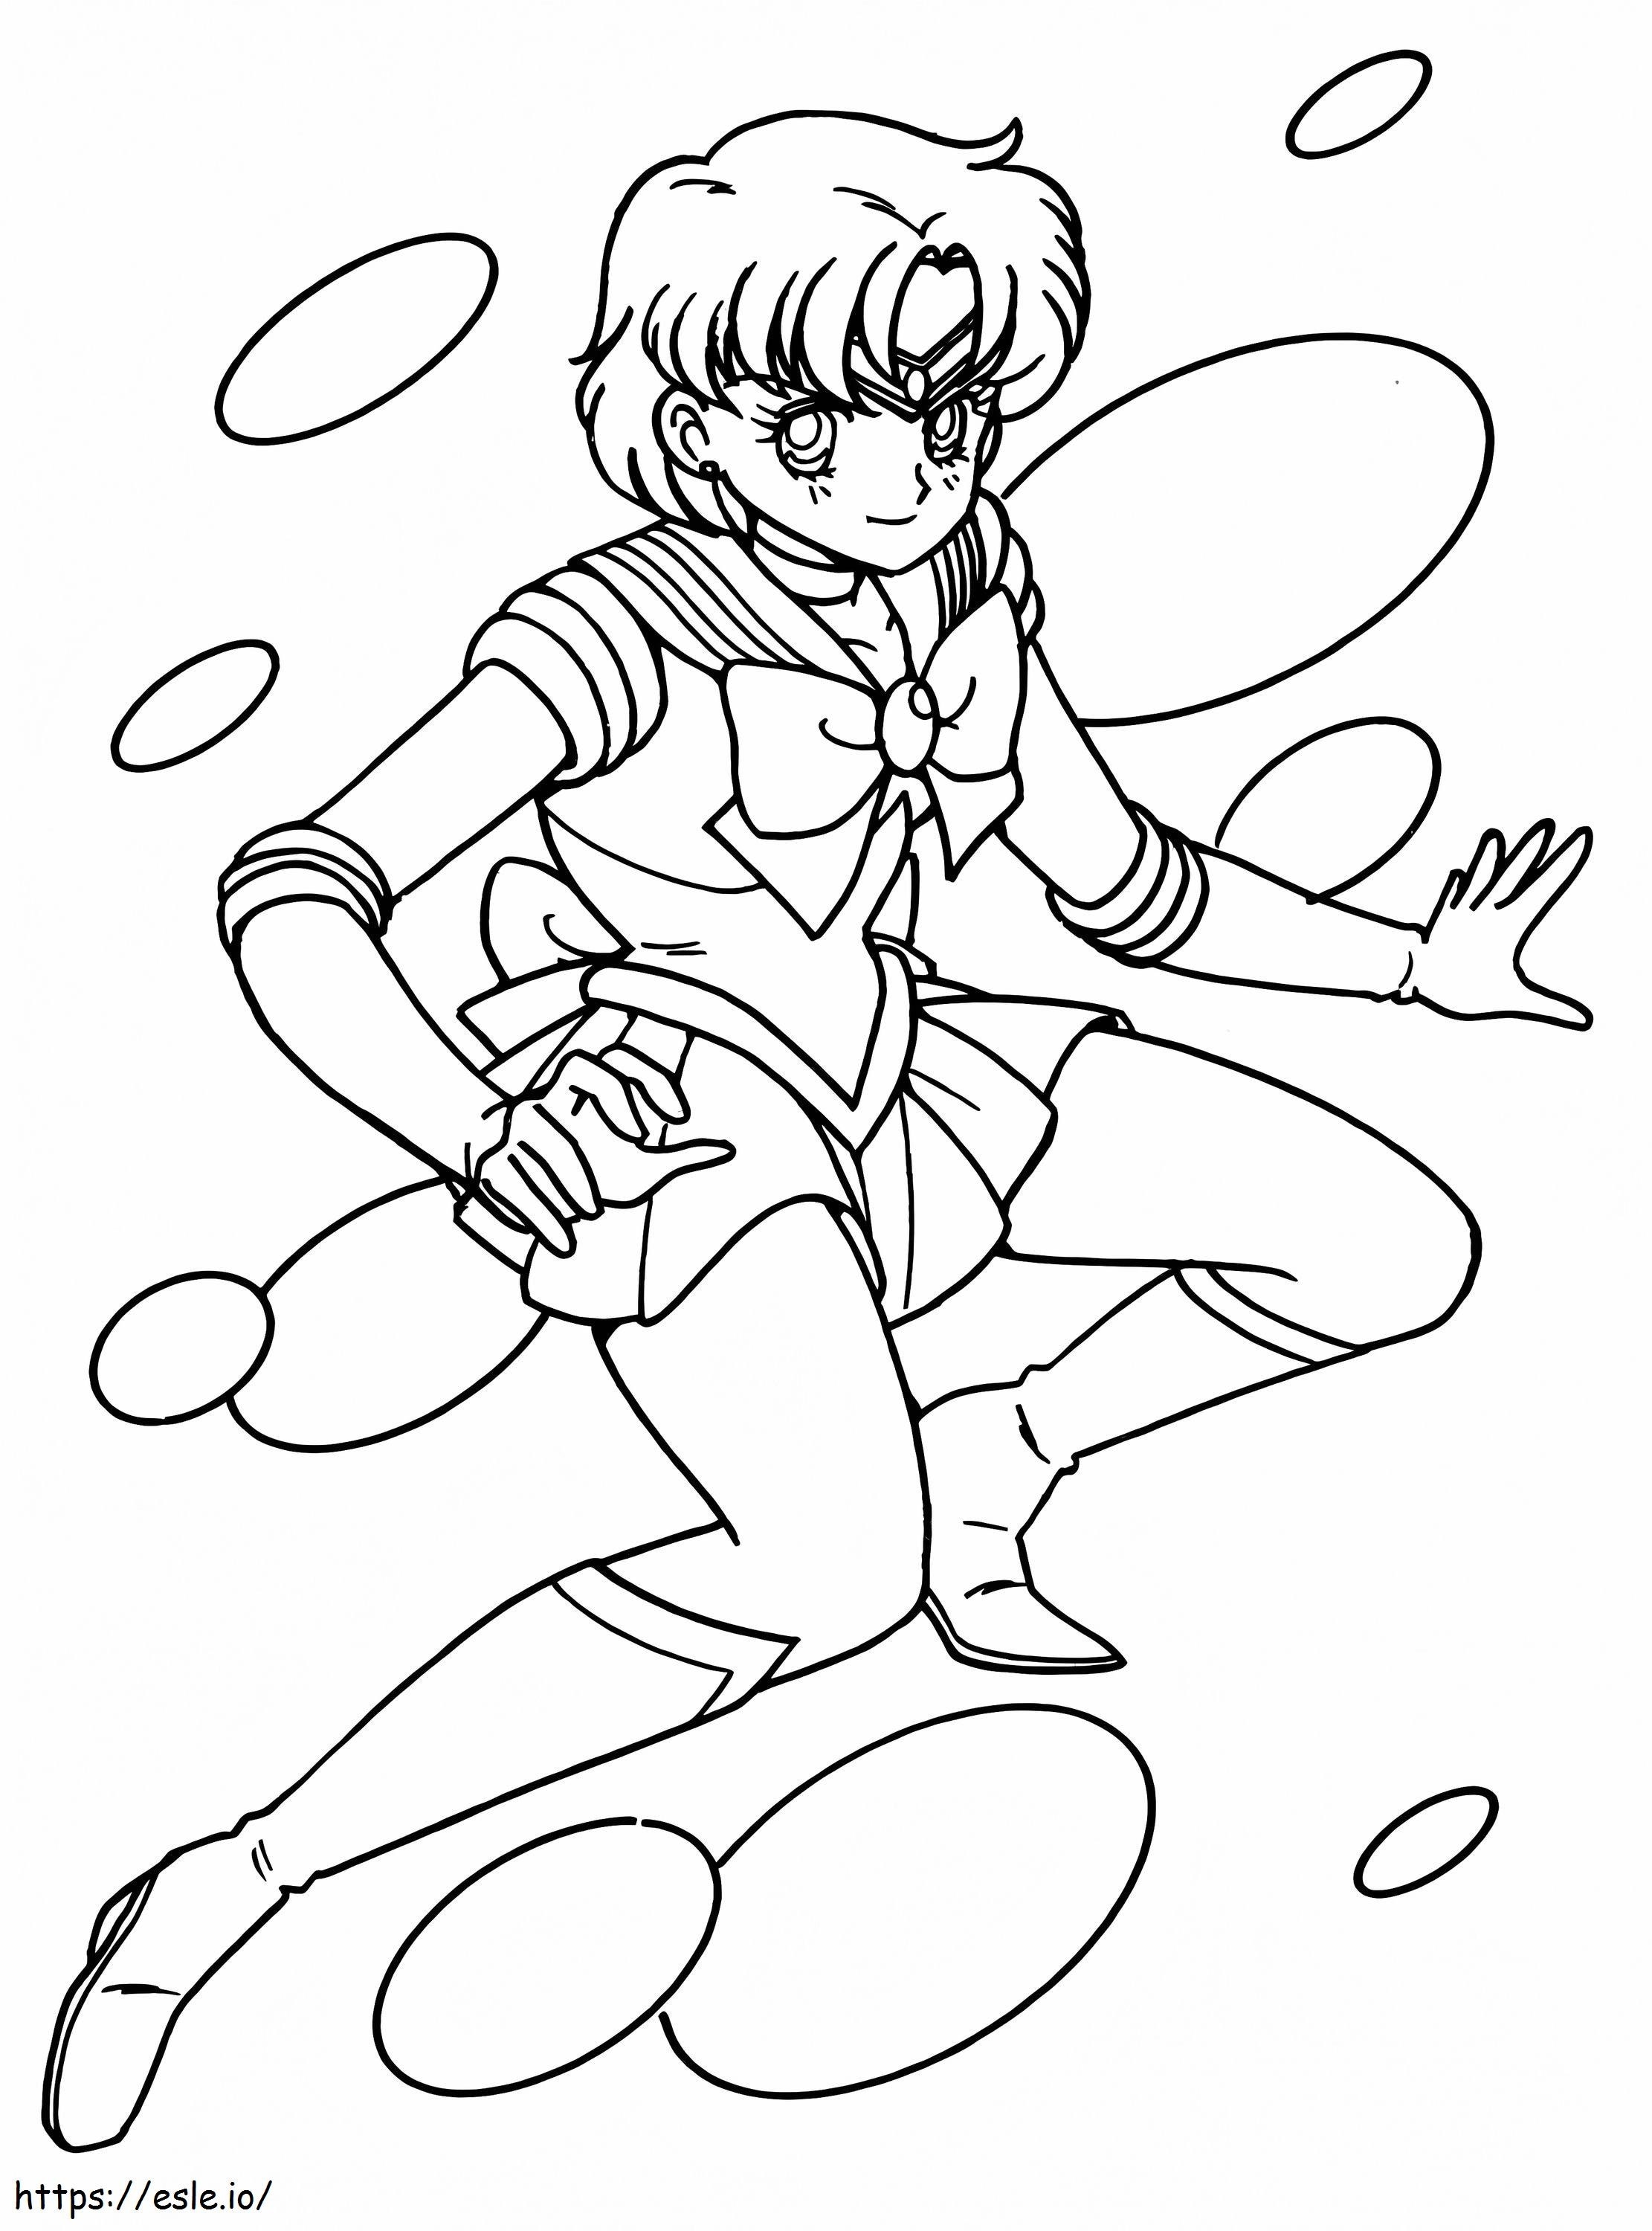 Cool Sailor Mercury coloring page